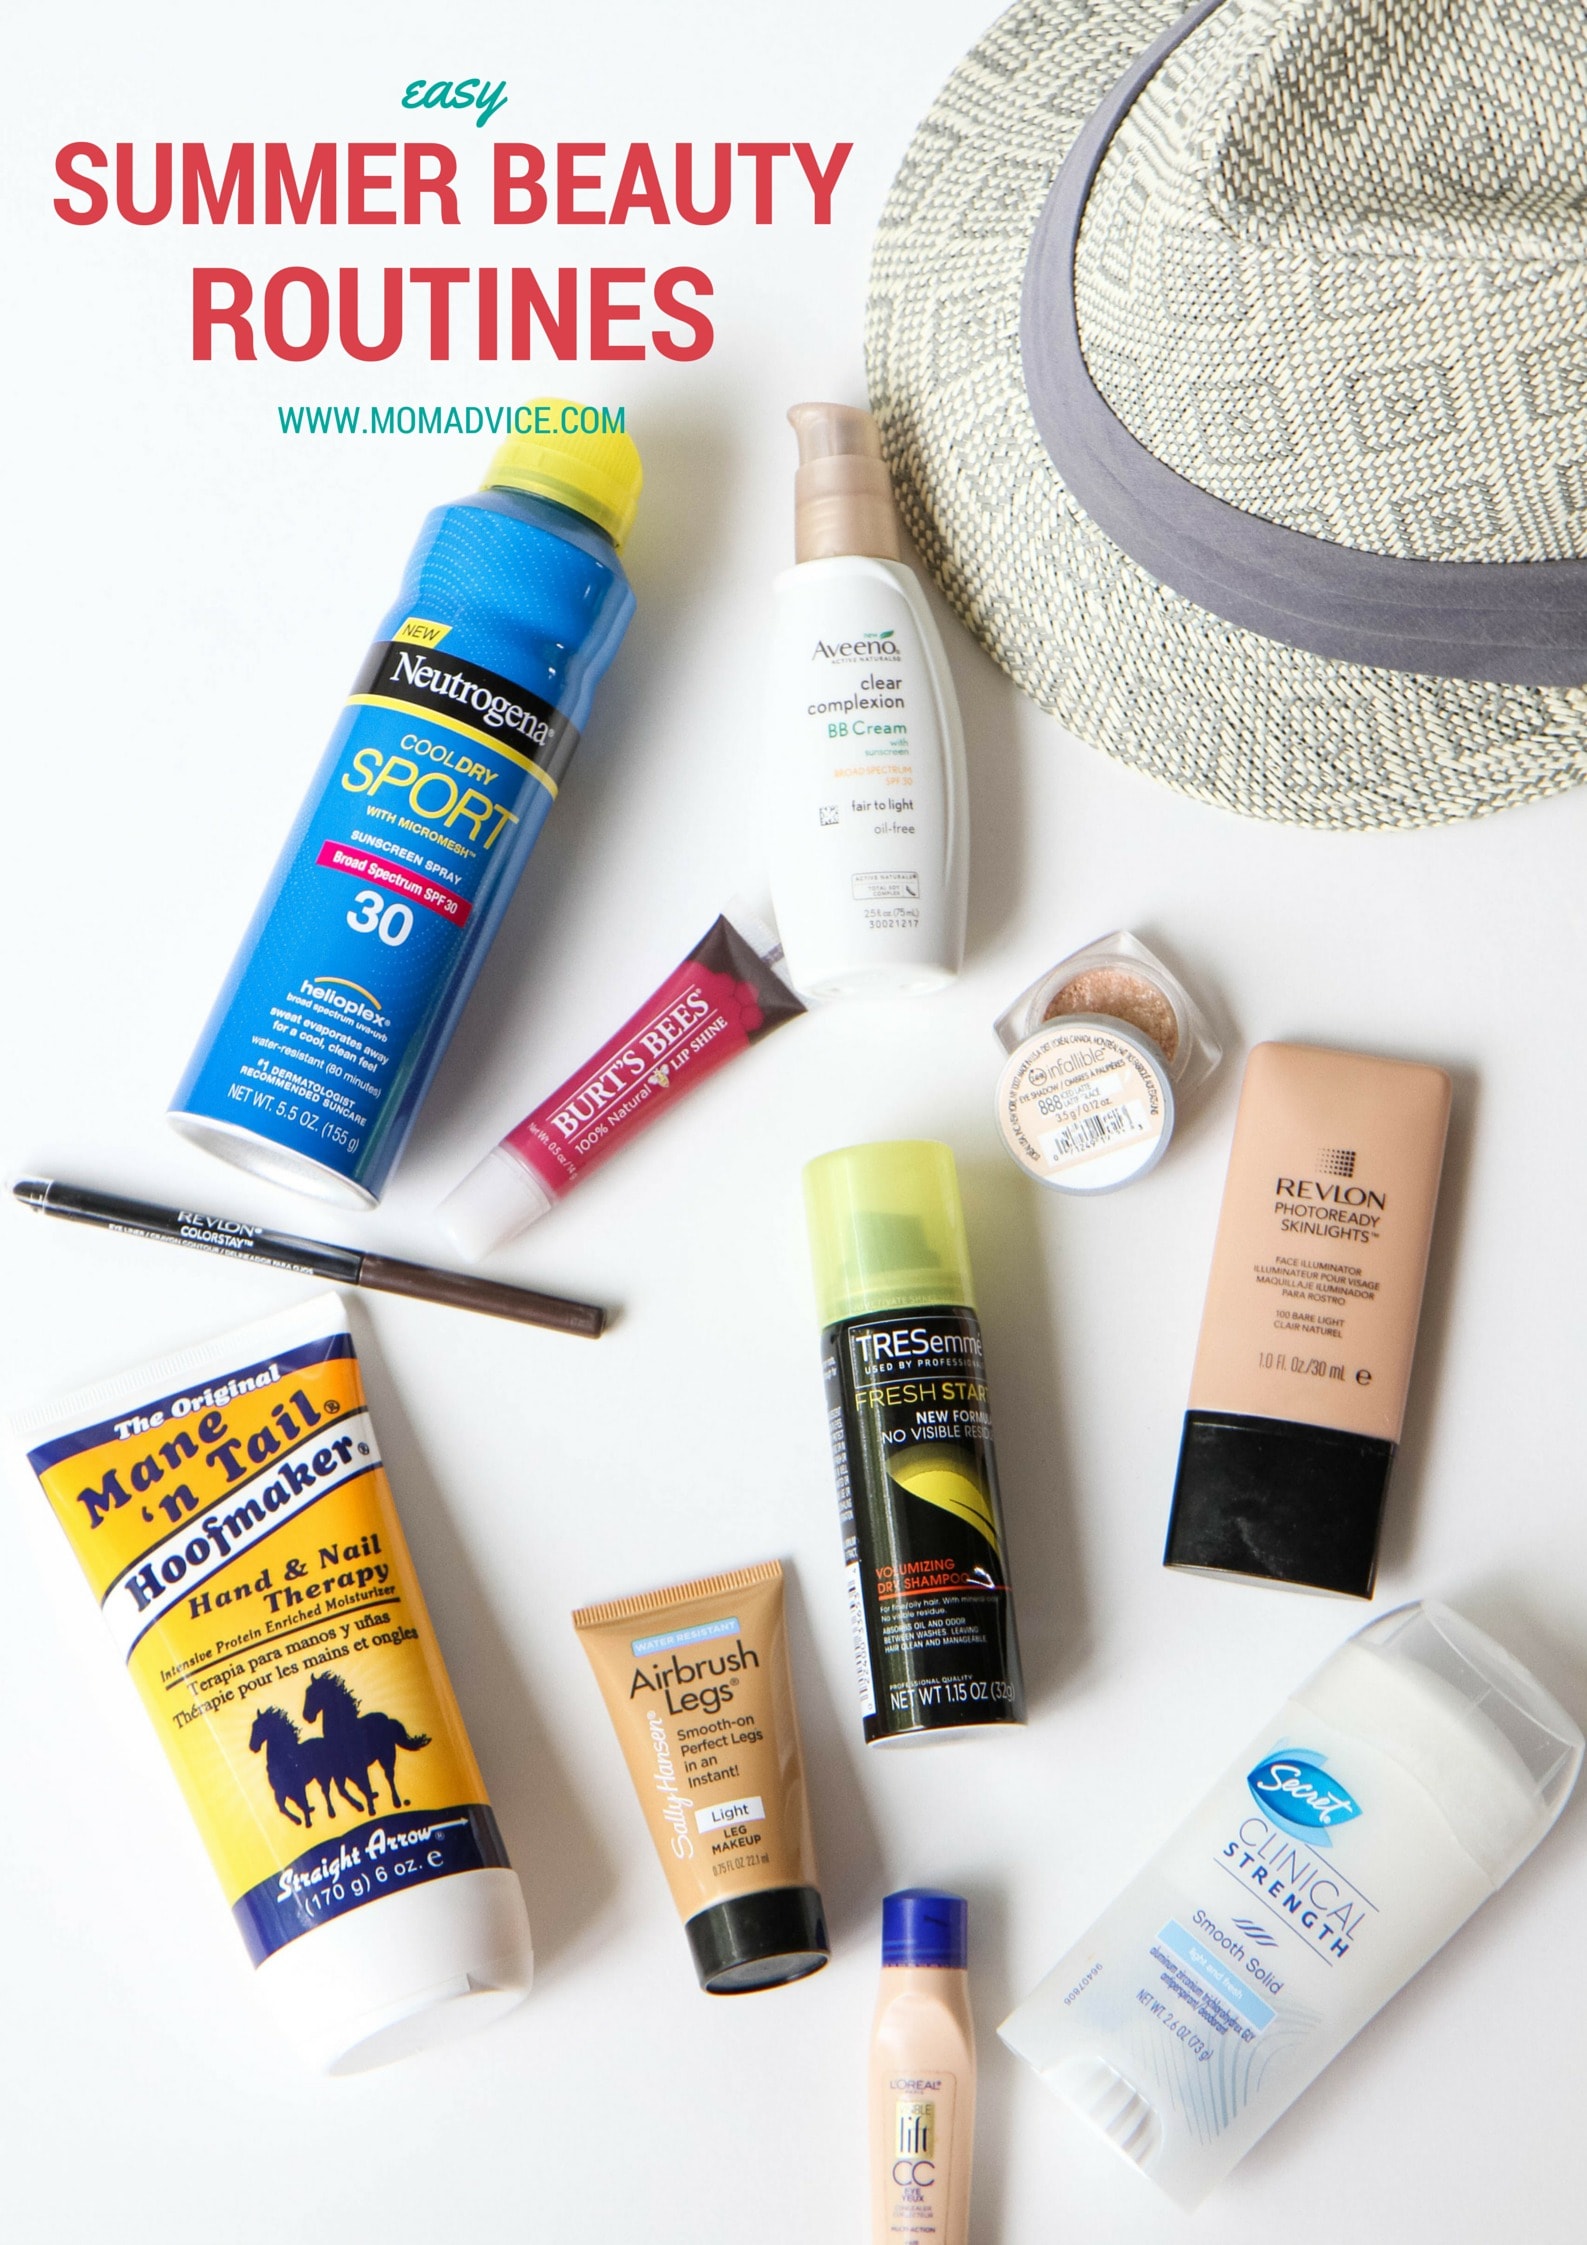 Easy Summer Beauty Routines